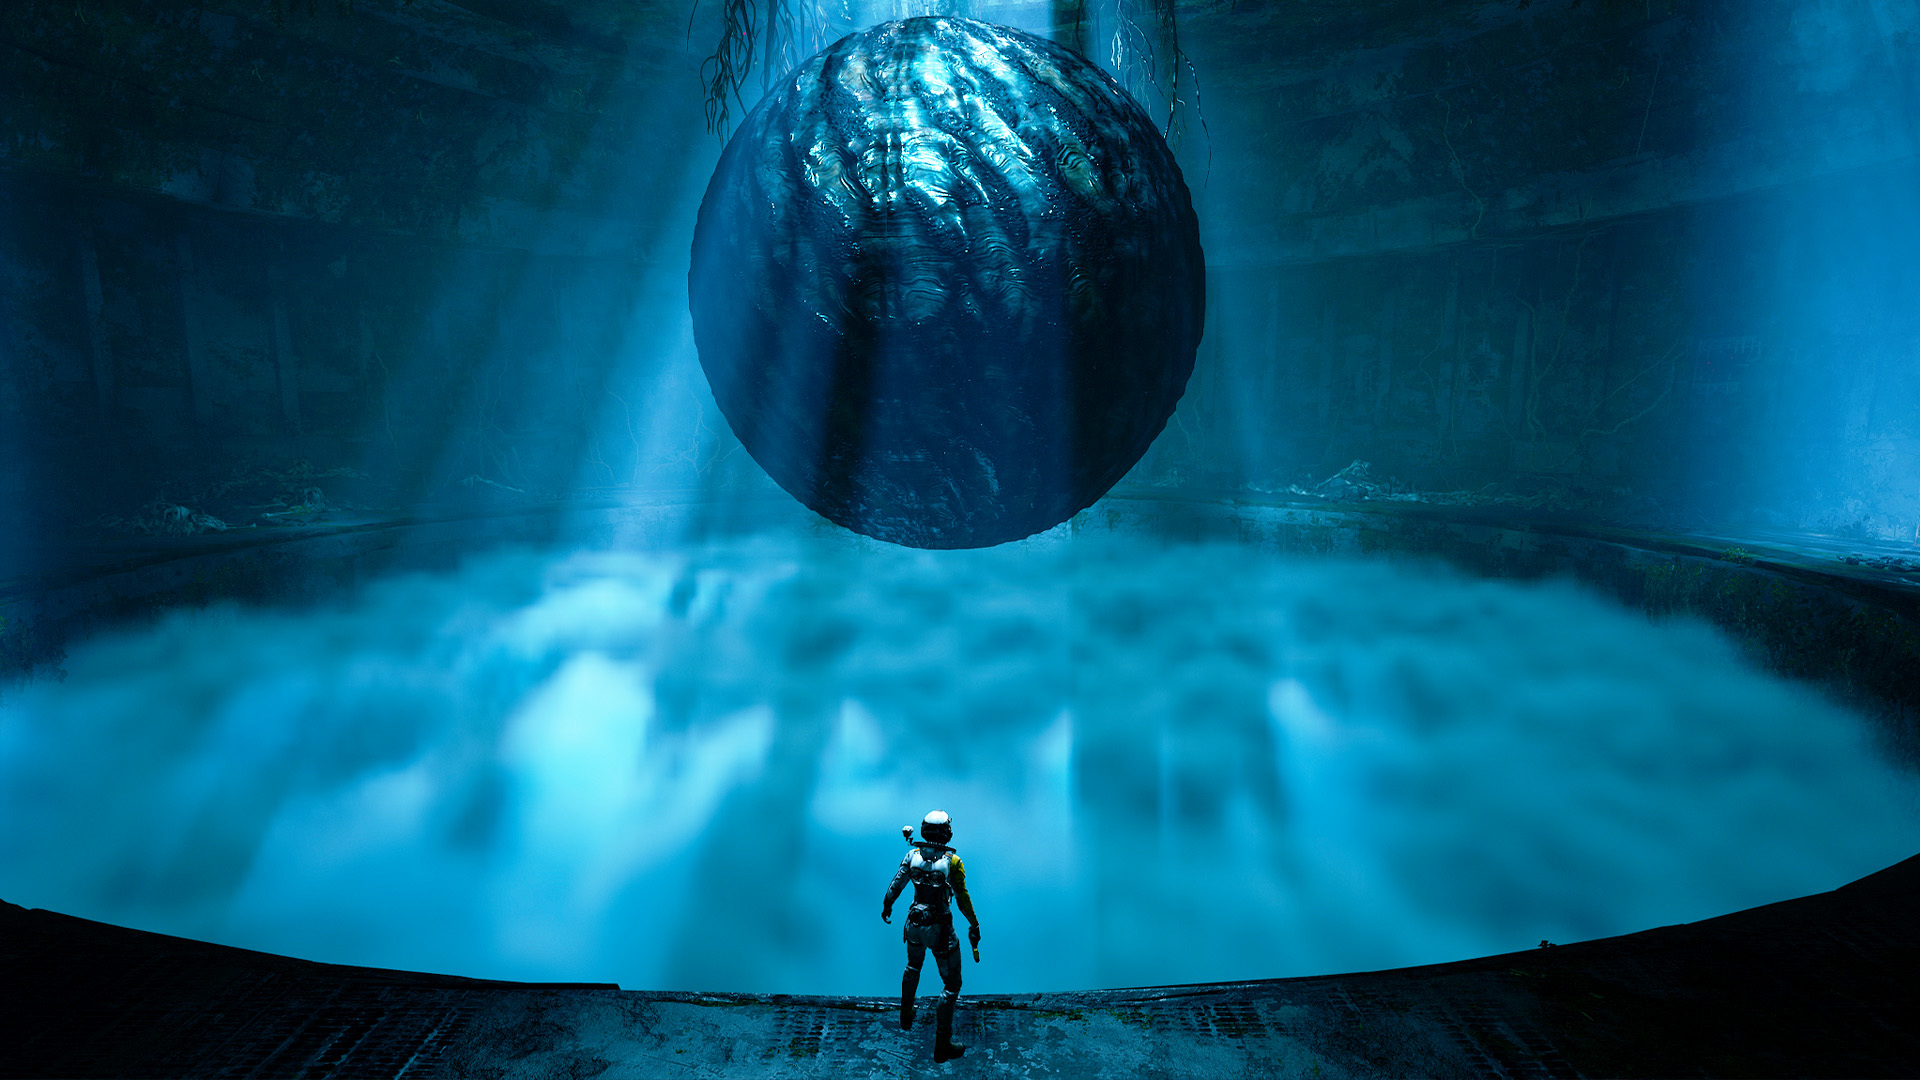 Best Returnal settings: The game's protagonist, Selene, stands in awe of the floating black sphere